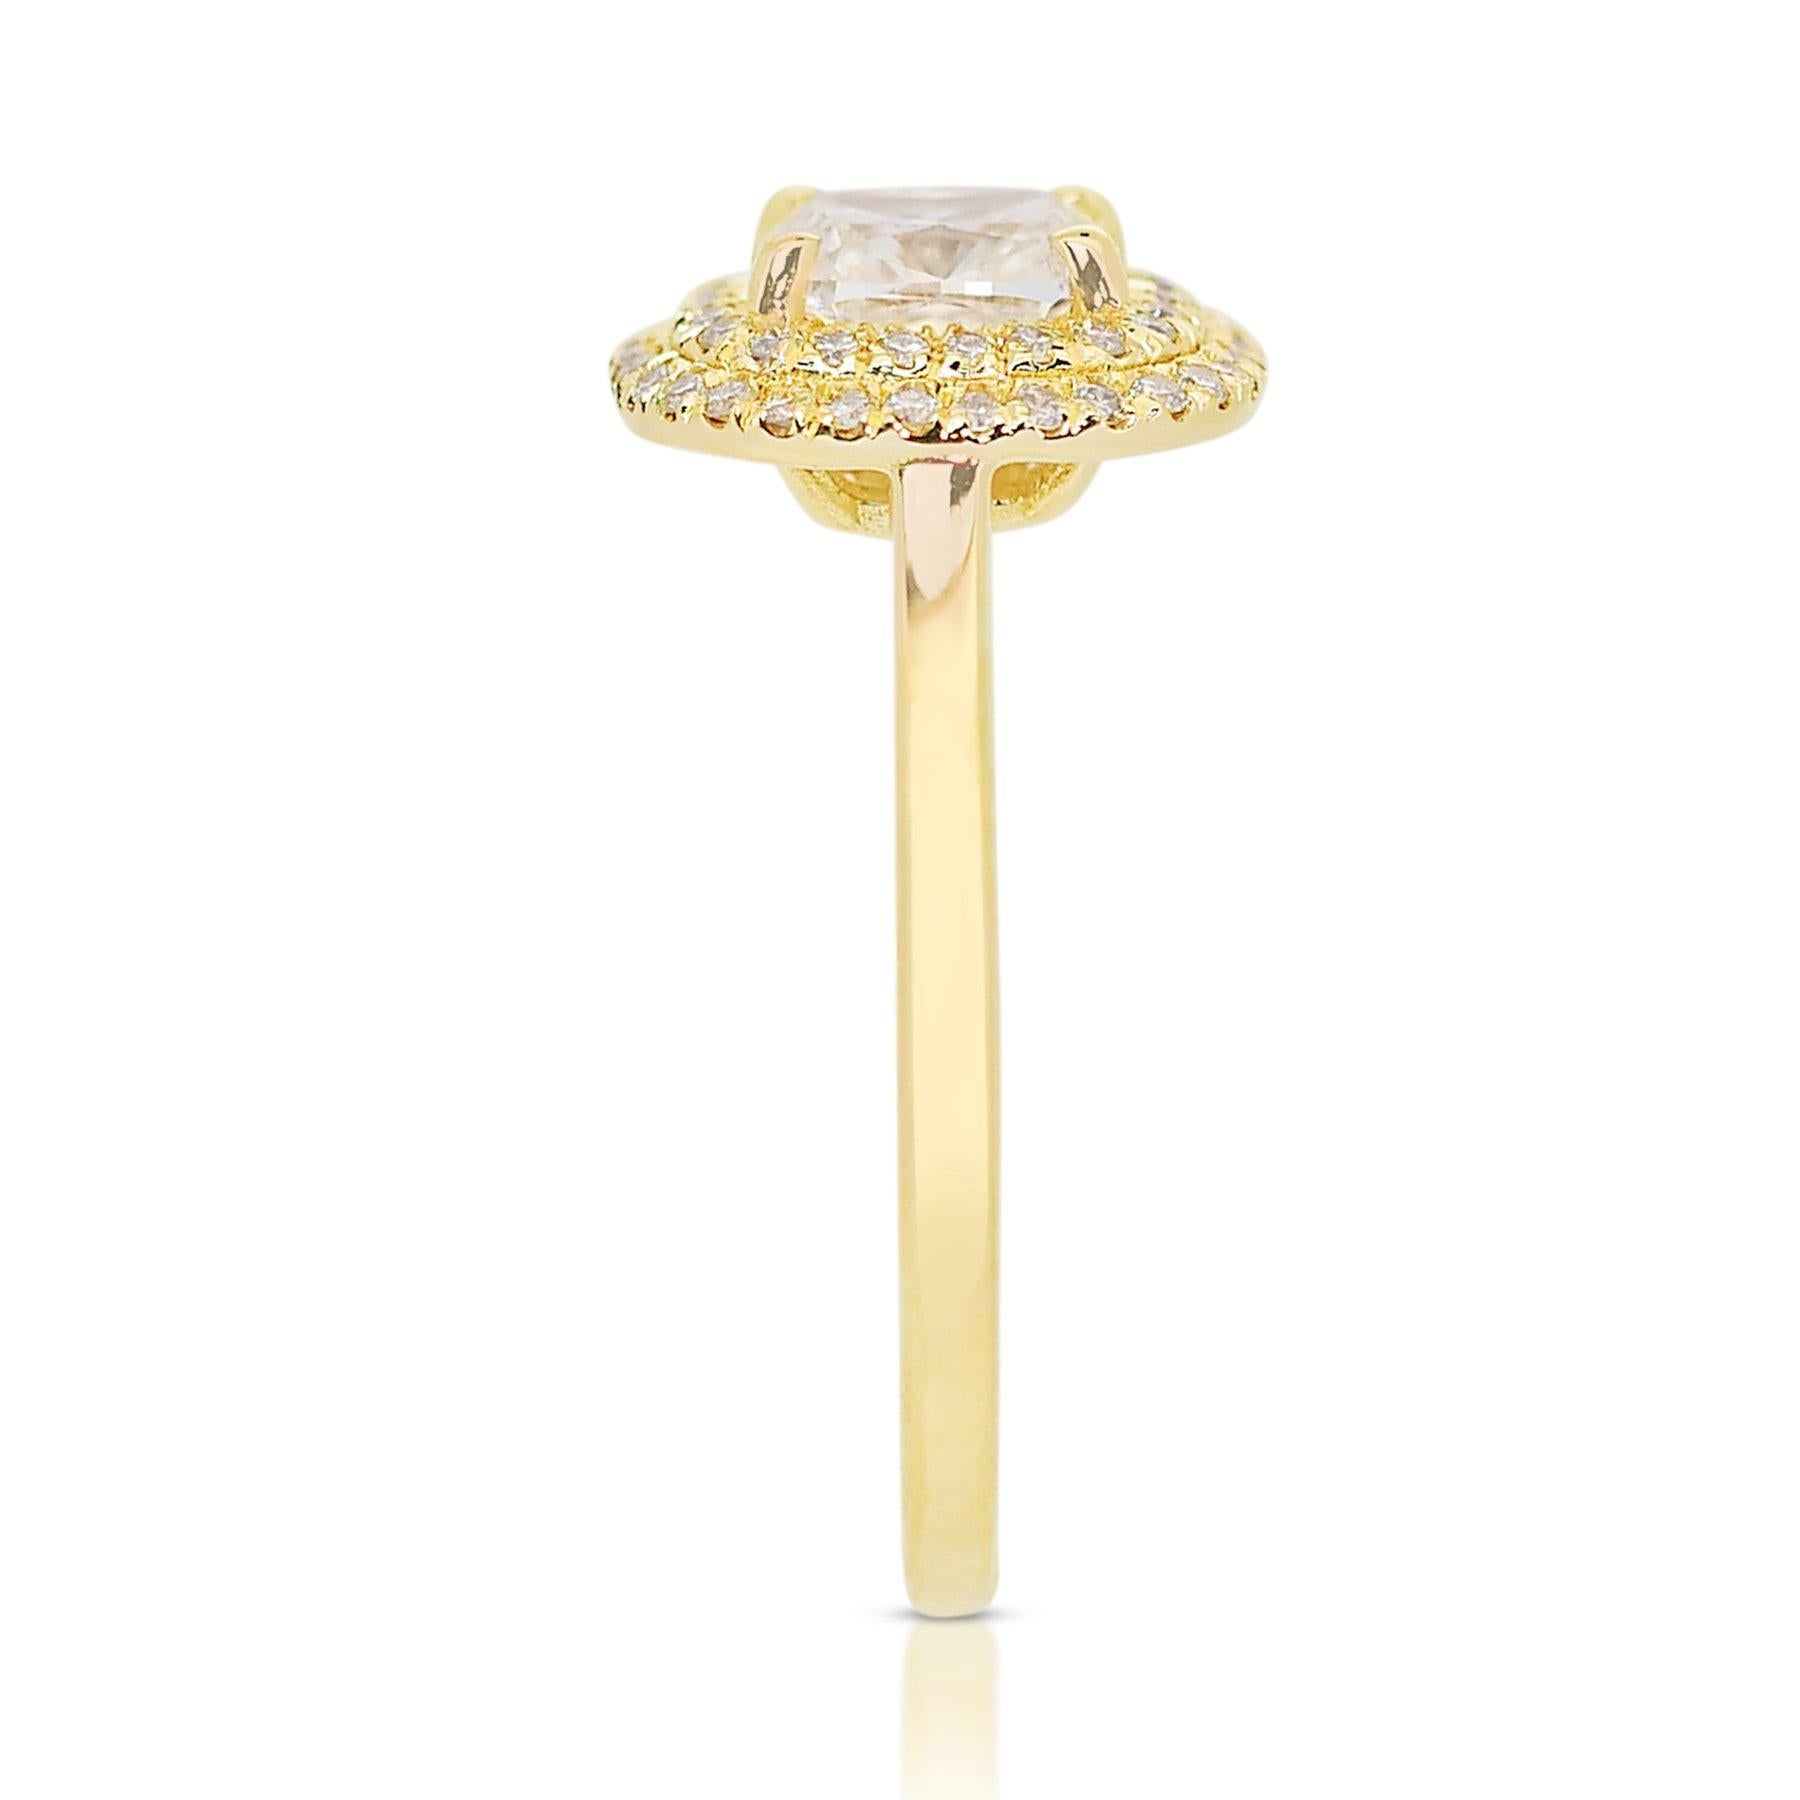 Majestic 1.78ct Diamond Halo Ring in 18k Yellow Gold - GIA Certified For Sale 1